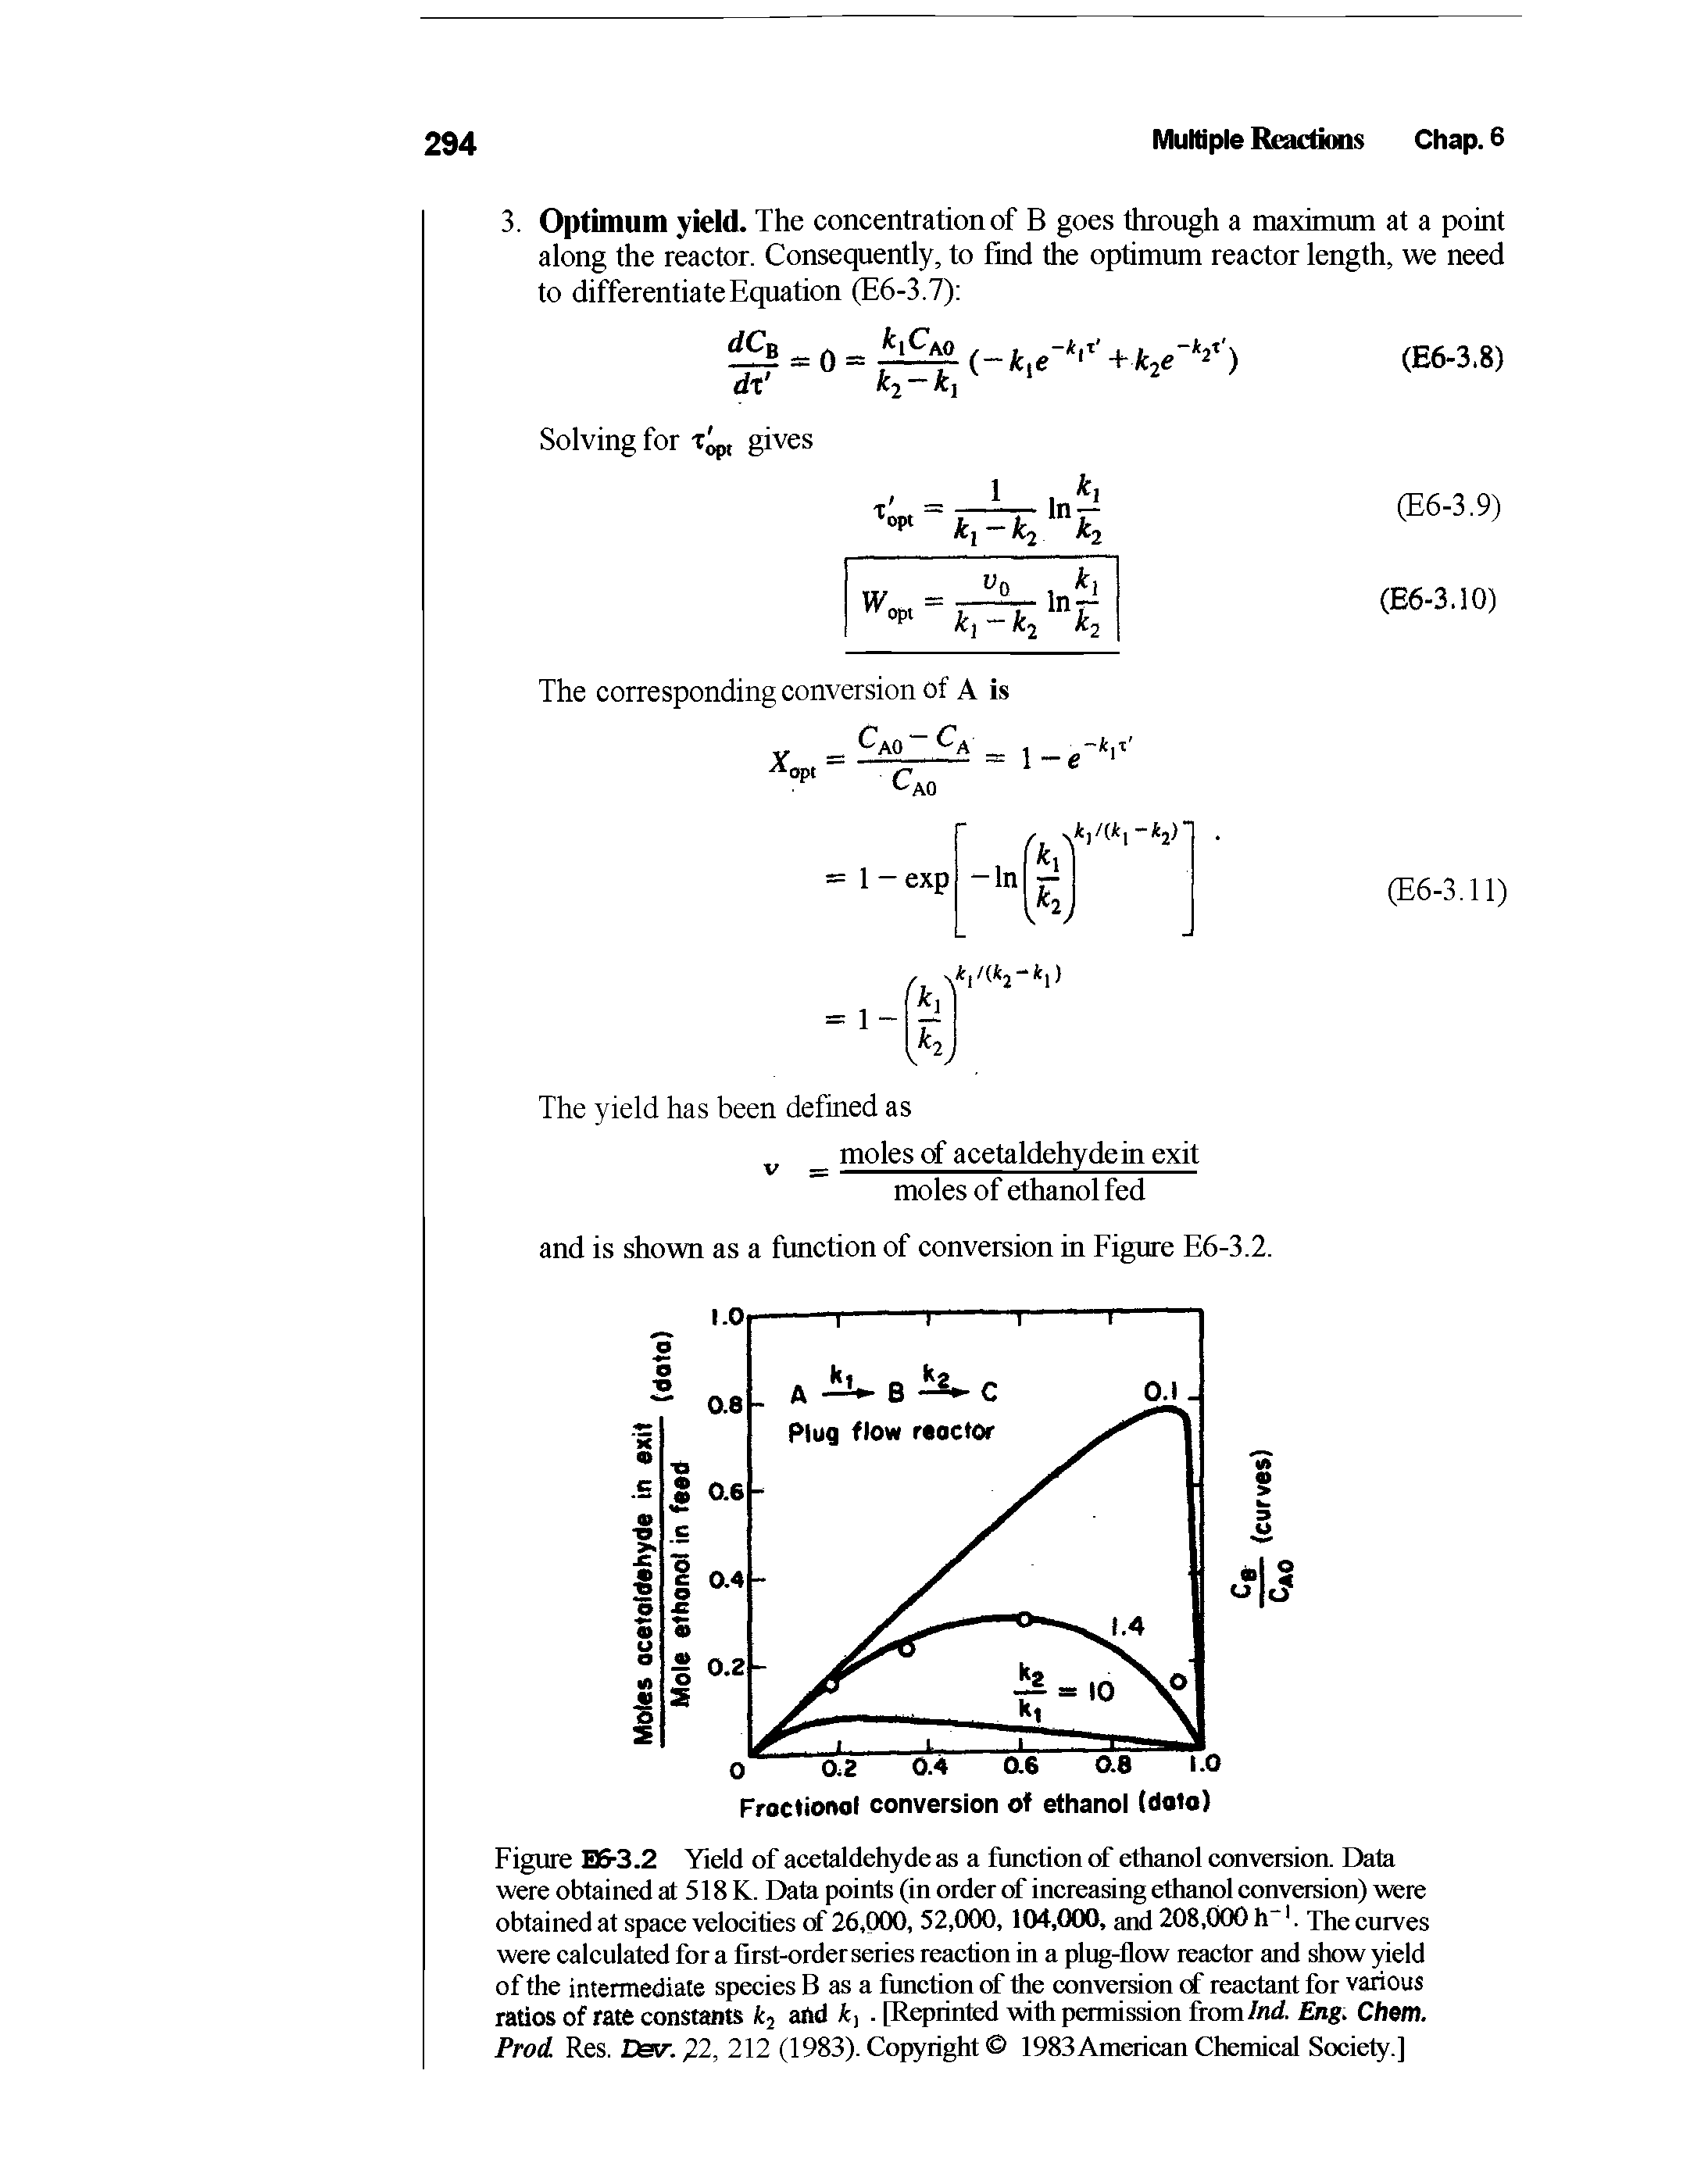 Figure E6-3.2 Yield of acetaldehyde as a function of ethanol conversion. Data were obtained at 518 K. Data points (in order of increasing ethanol conversion) were obtained at space velocities of 26,000, 52,000, 104,000, and 208,000 h". The curves were calculated for a first-order series reaction in a plug-flow reactor and show yield of the intermediate species B as a function of the conversion cf reactant for various ratios of rate constants and [Reprinted with permission from/nd. Eng. Chem. Prod Res. Dev. 22, 212 (1983). Copyright 1983American Chemical Society.]...